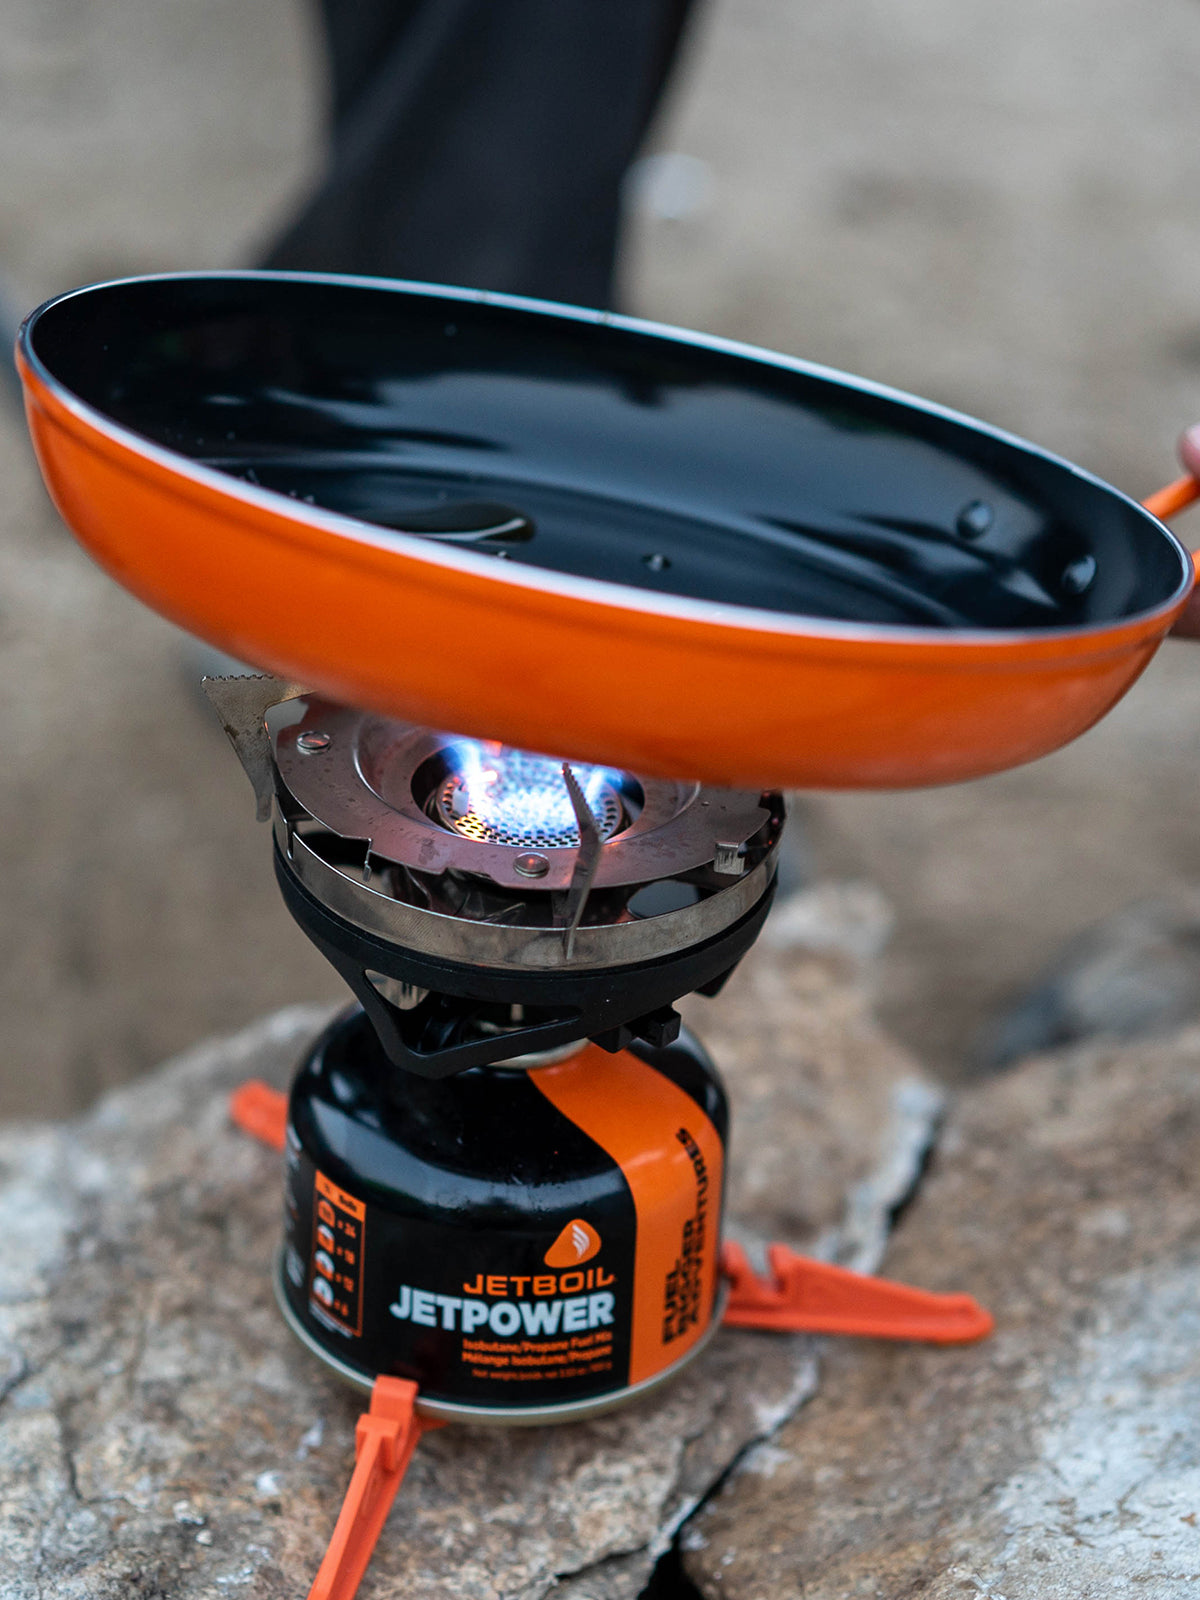 Jetboil Summit Skillet Pan used for cooking